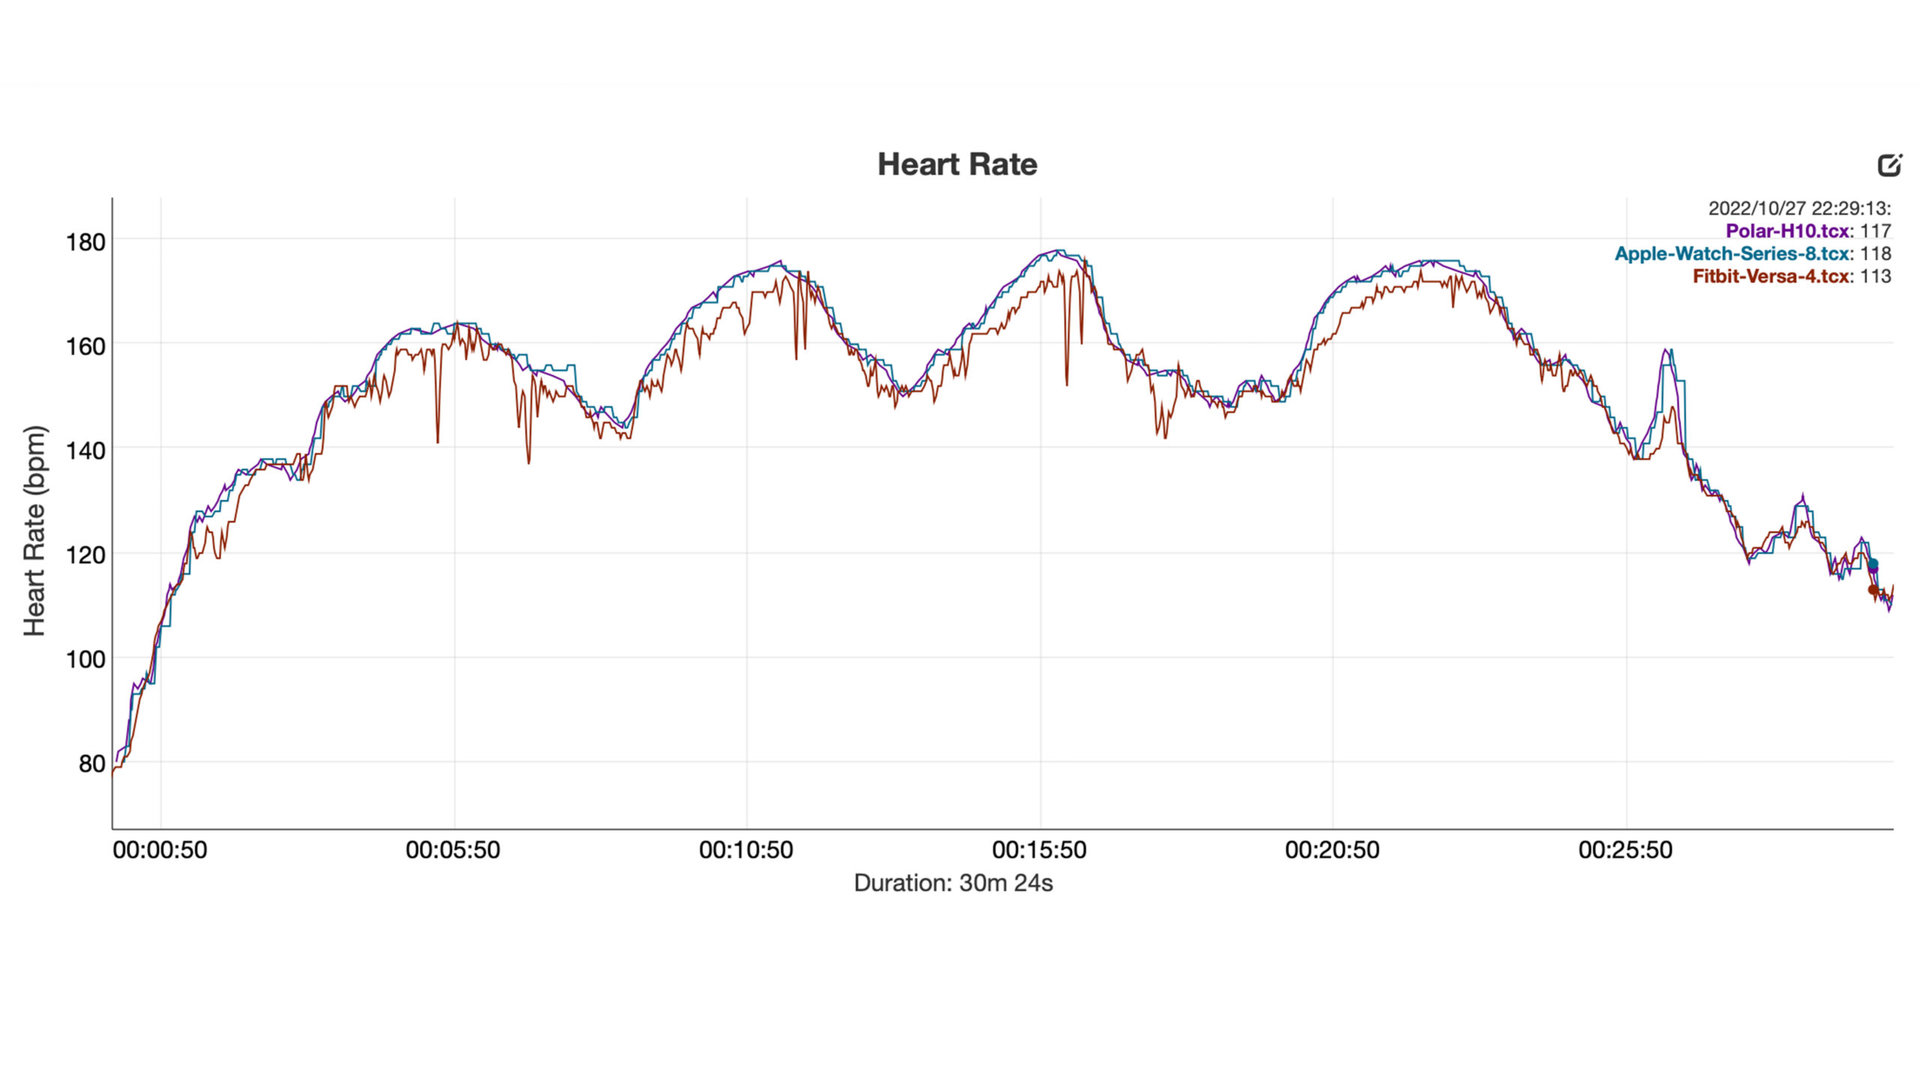 Heart Rate data shows the Fitbit Versa 4 record inaccurate values during a spin workout.